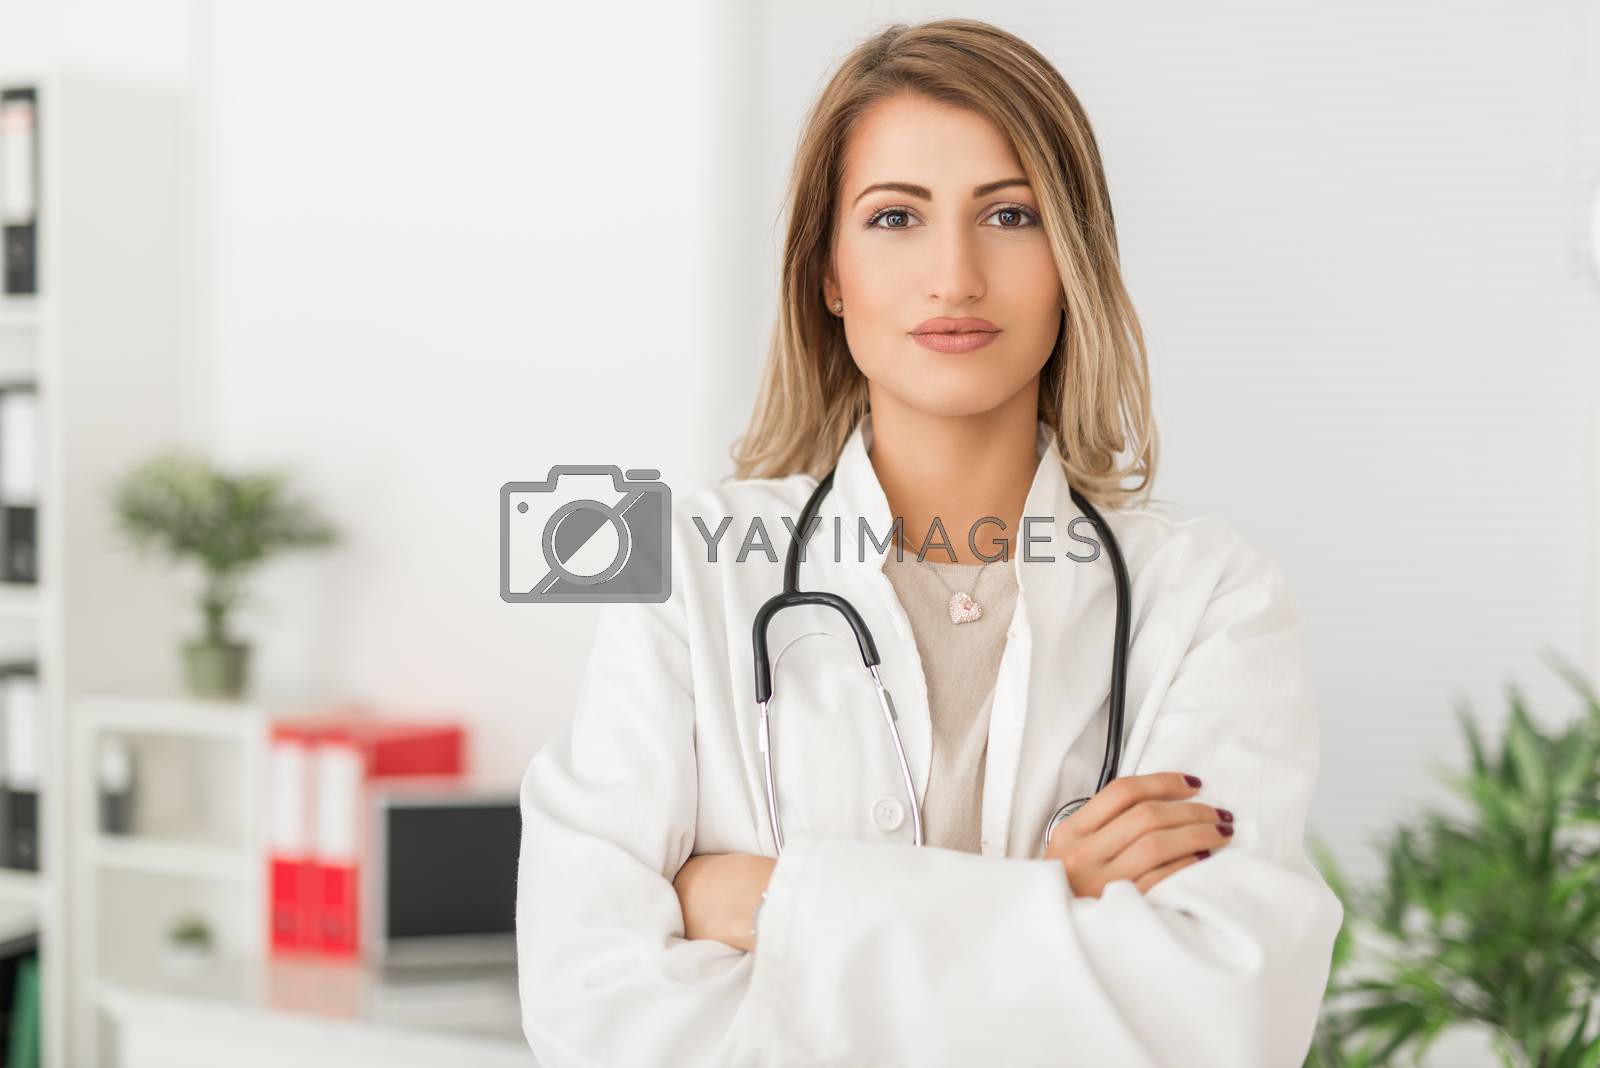 Royalty free image of Female Doctor by MilanMarkovic78